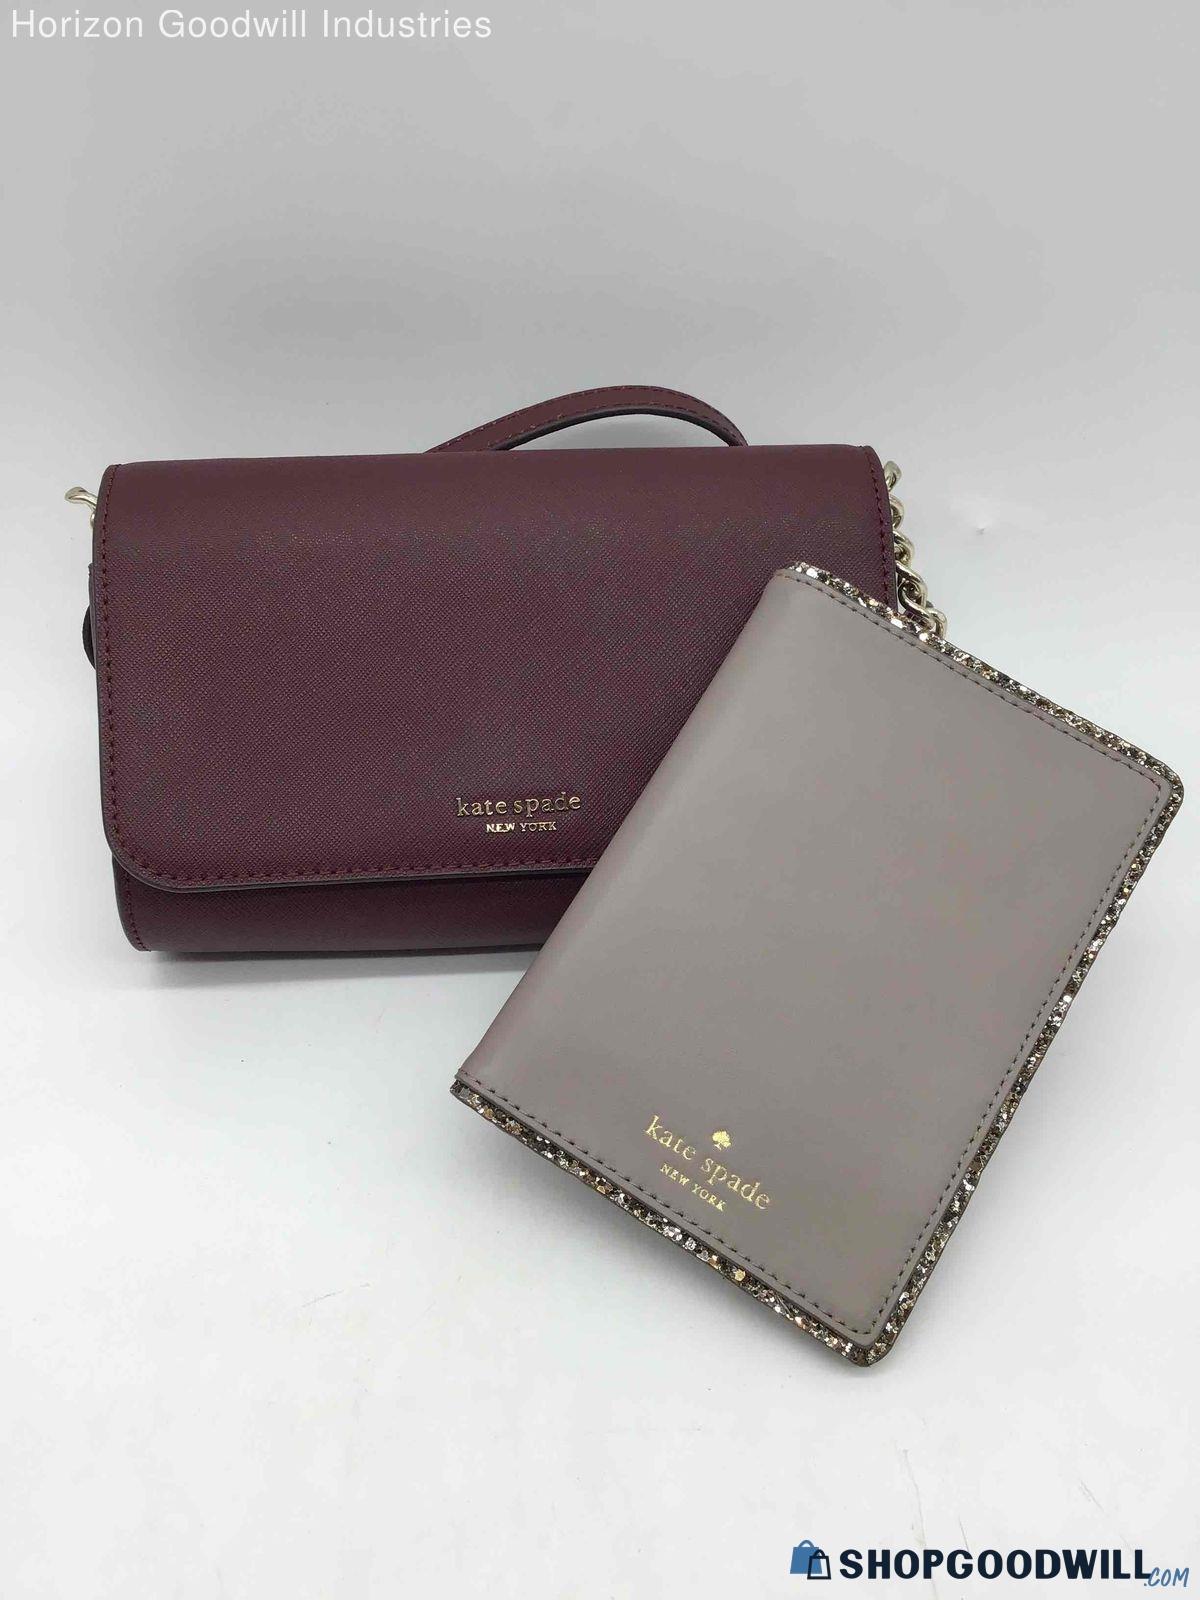 Kate Spade Leather Burgundy Crossbody & Taupe Wallet - shopgoodwill.com